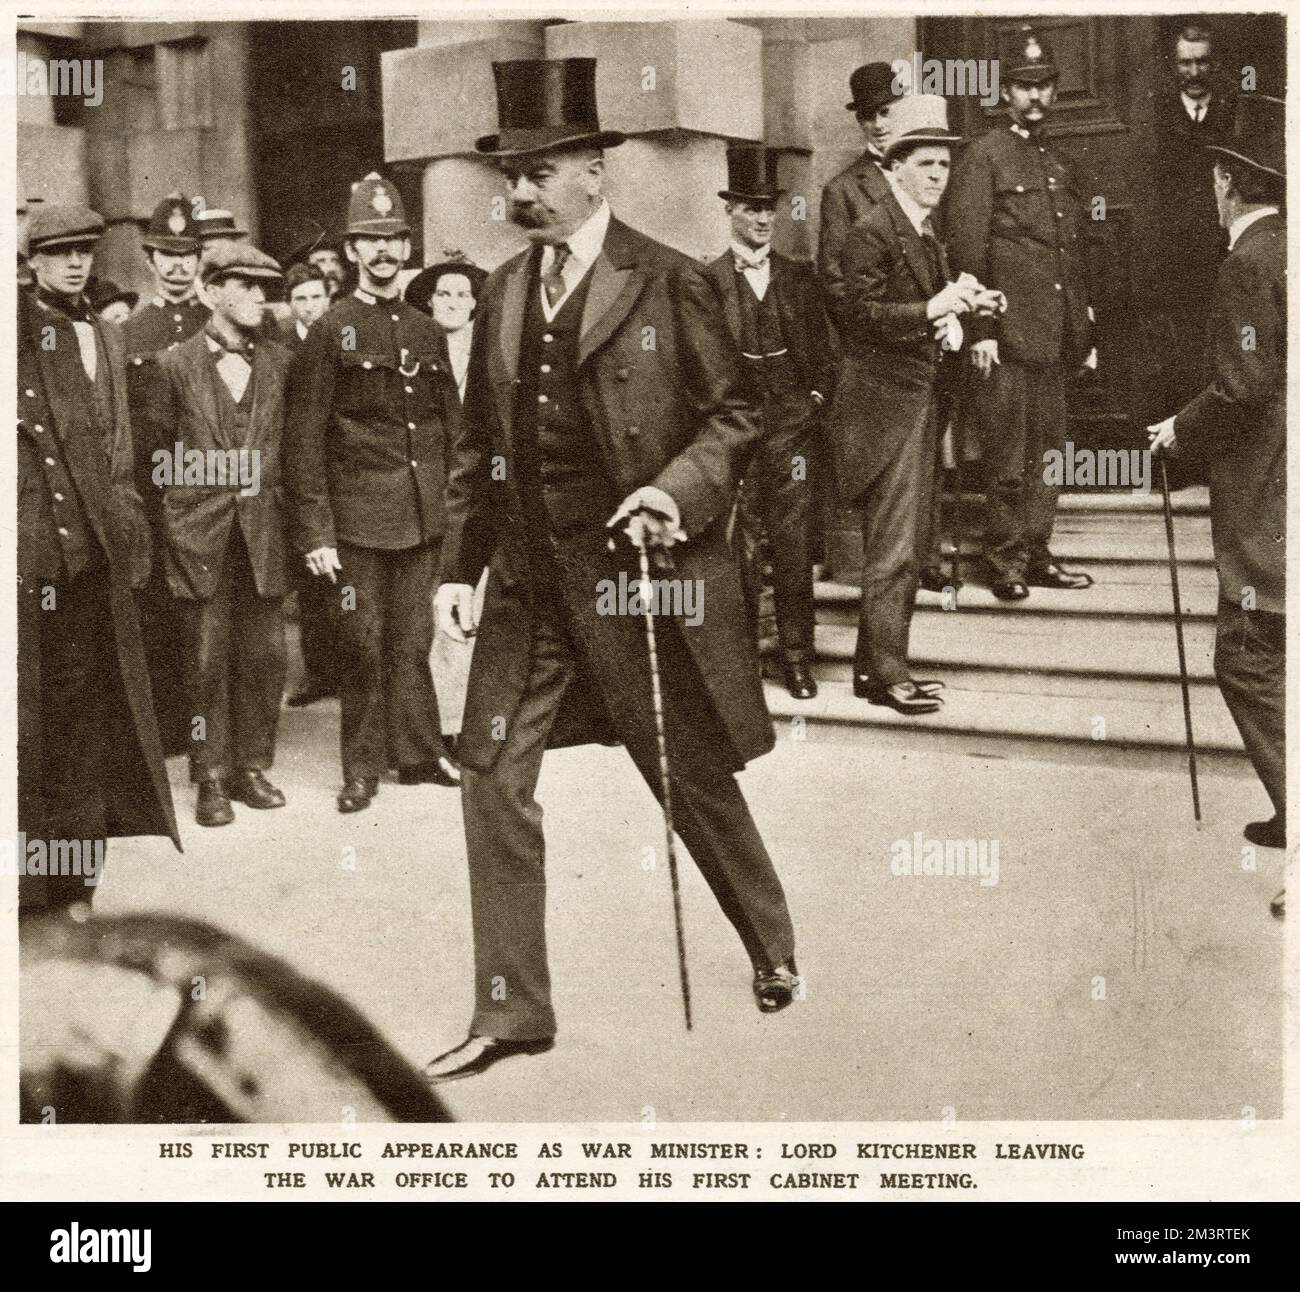 Lord Kitchener walking down steps alone of War Office. His first public appearance as Secretary for War. On the steps in the light-coloured top hat is Mr F E Smith, MP, Chief of the new Press Bureau. Stock Photo